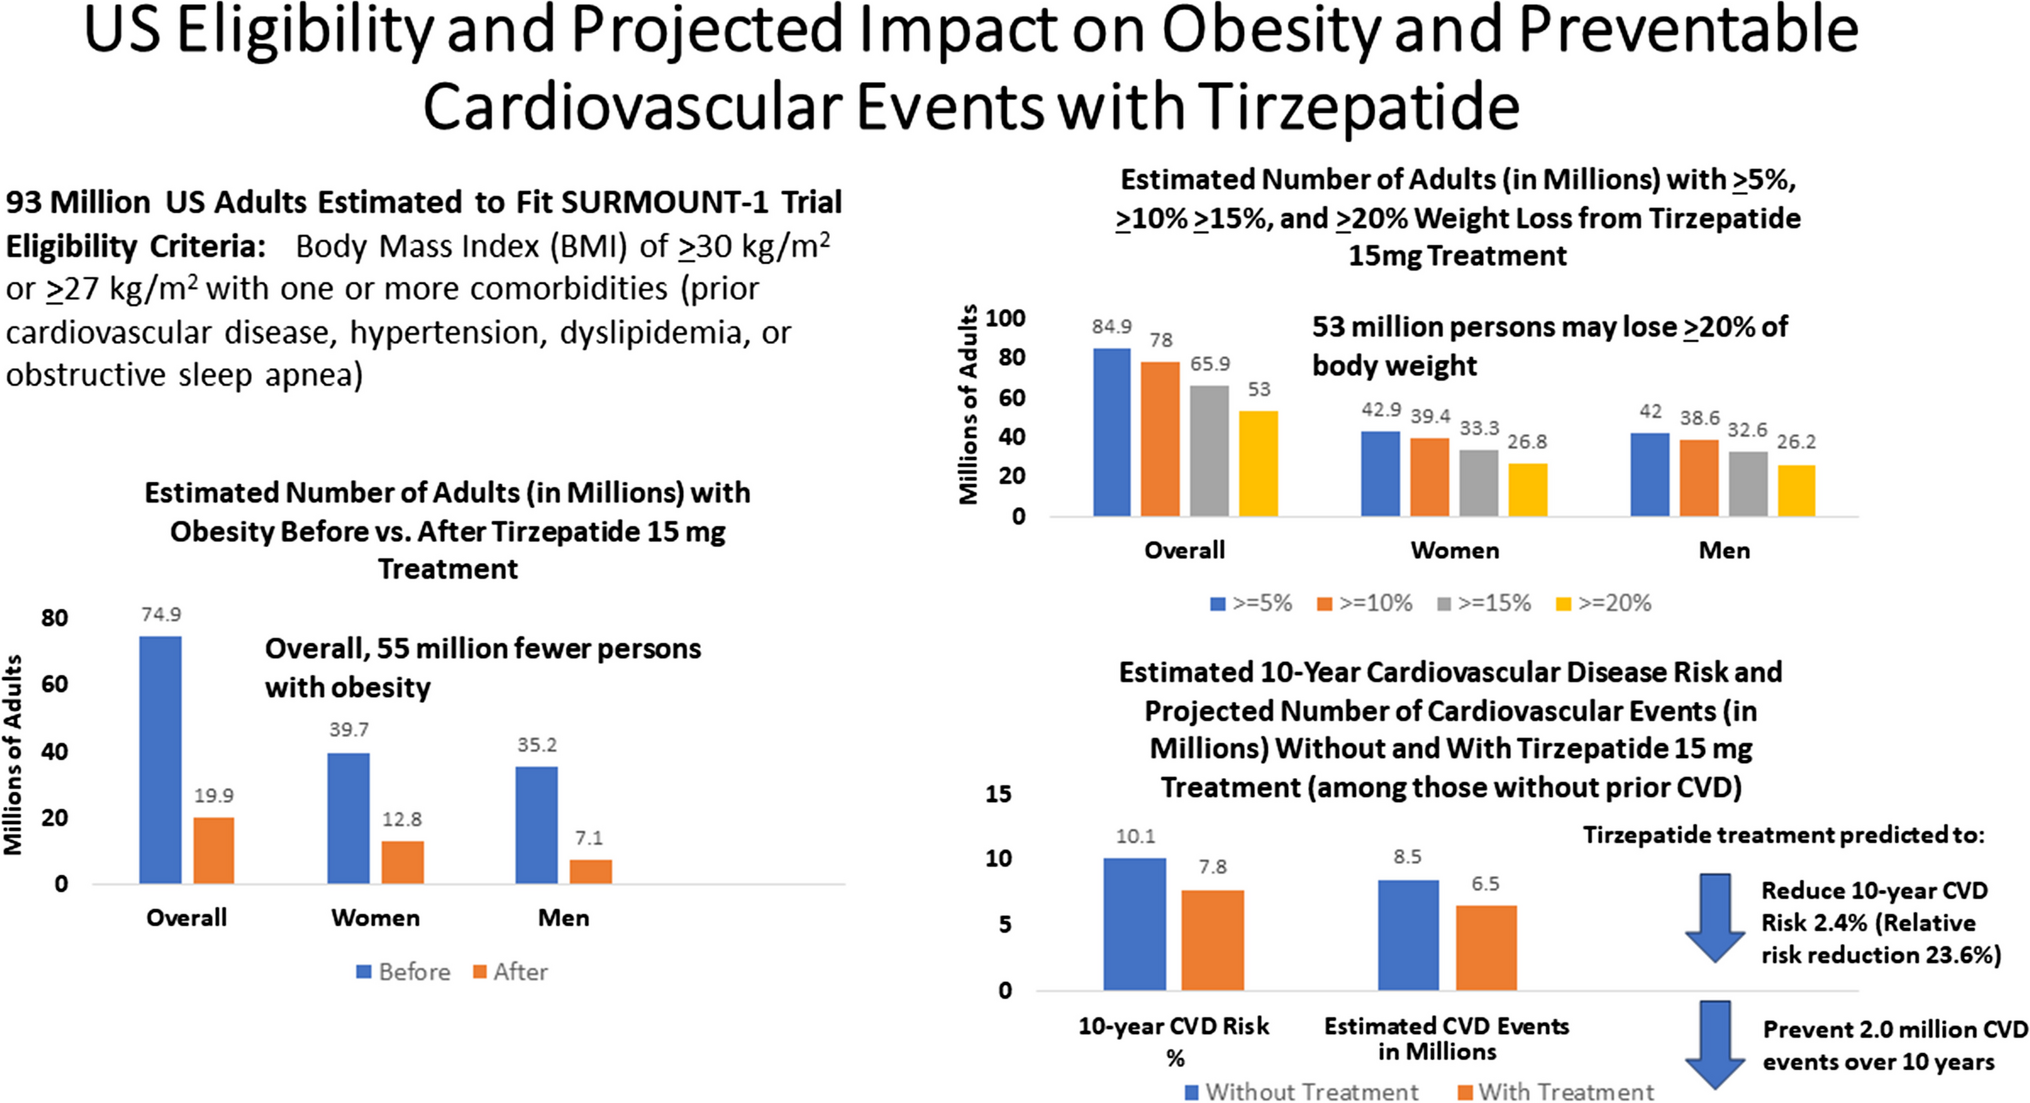 US Population Eligibility and Estimated Impact of Tirzepatide Treatment on Obesity Prevalence and Cardiovascular Disease Events